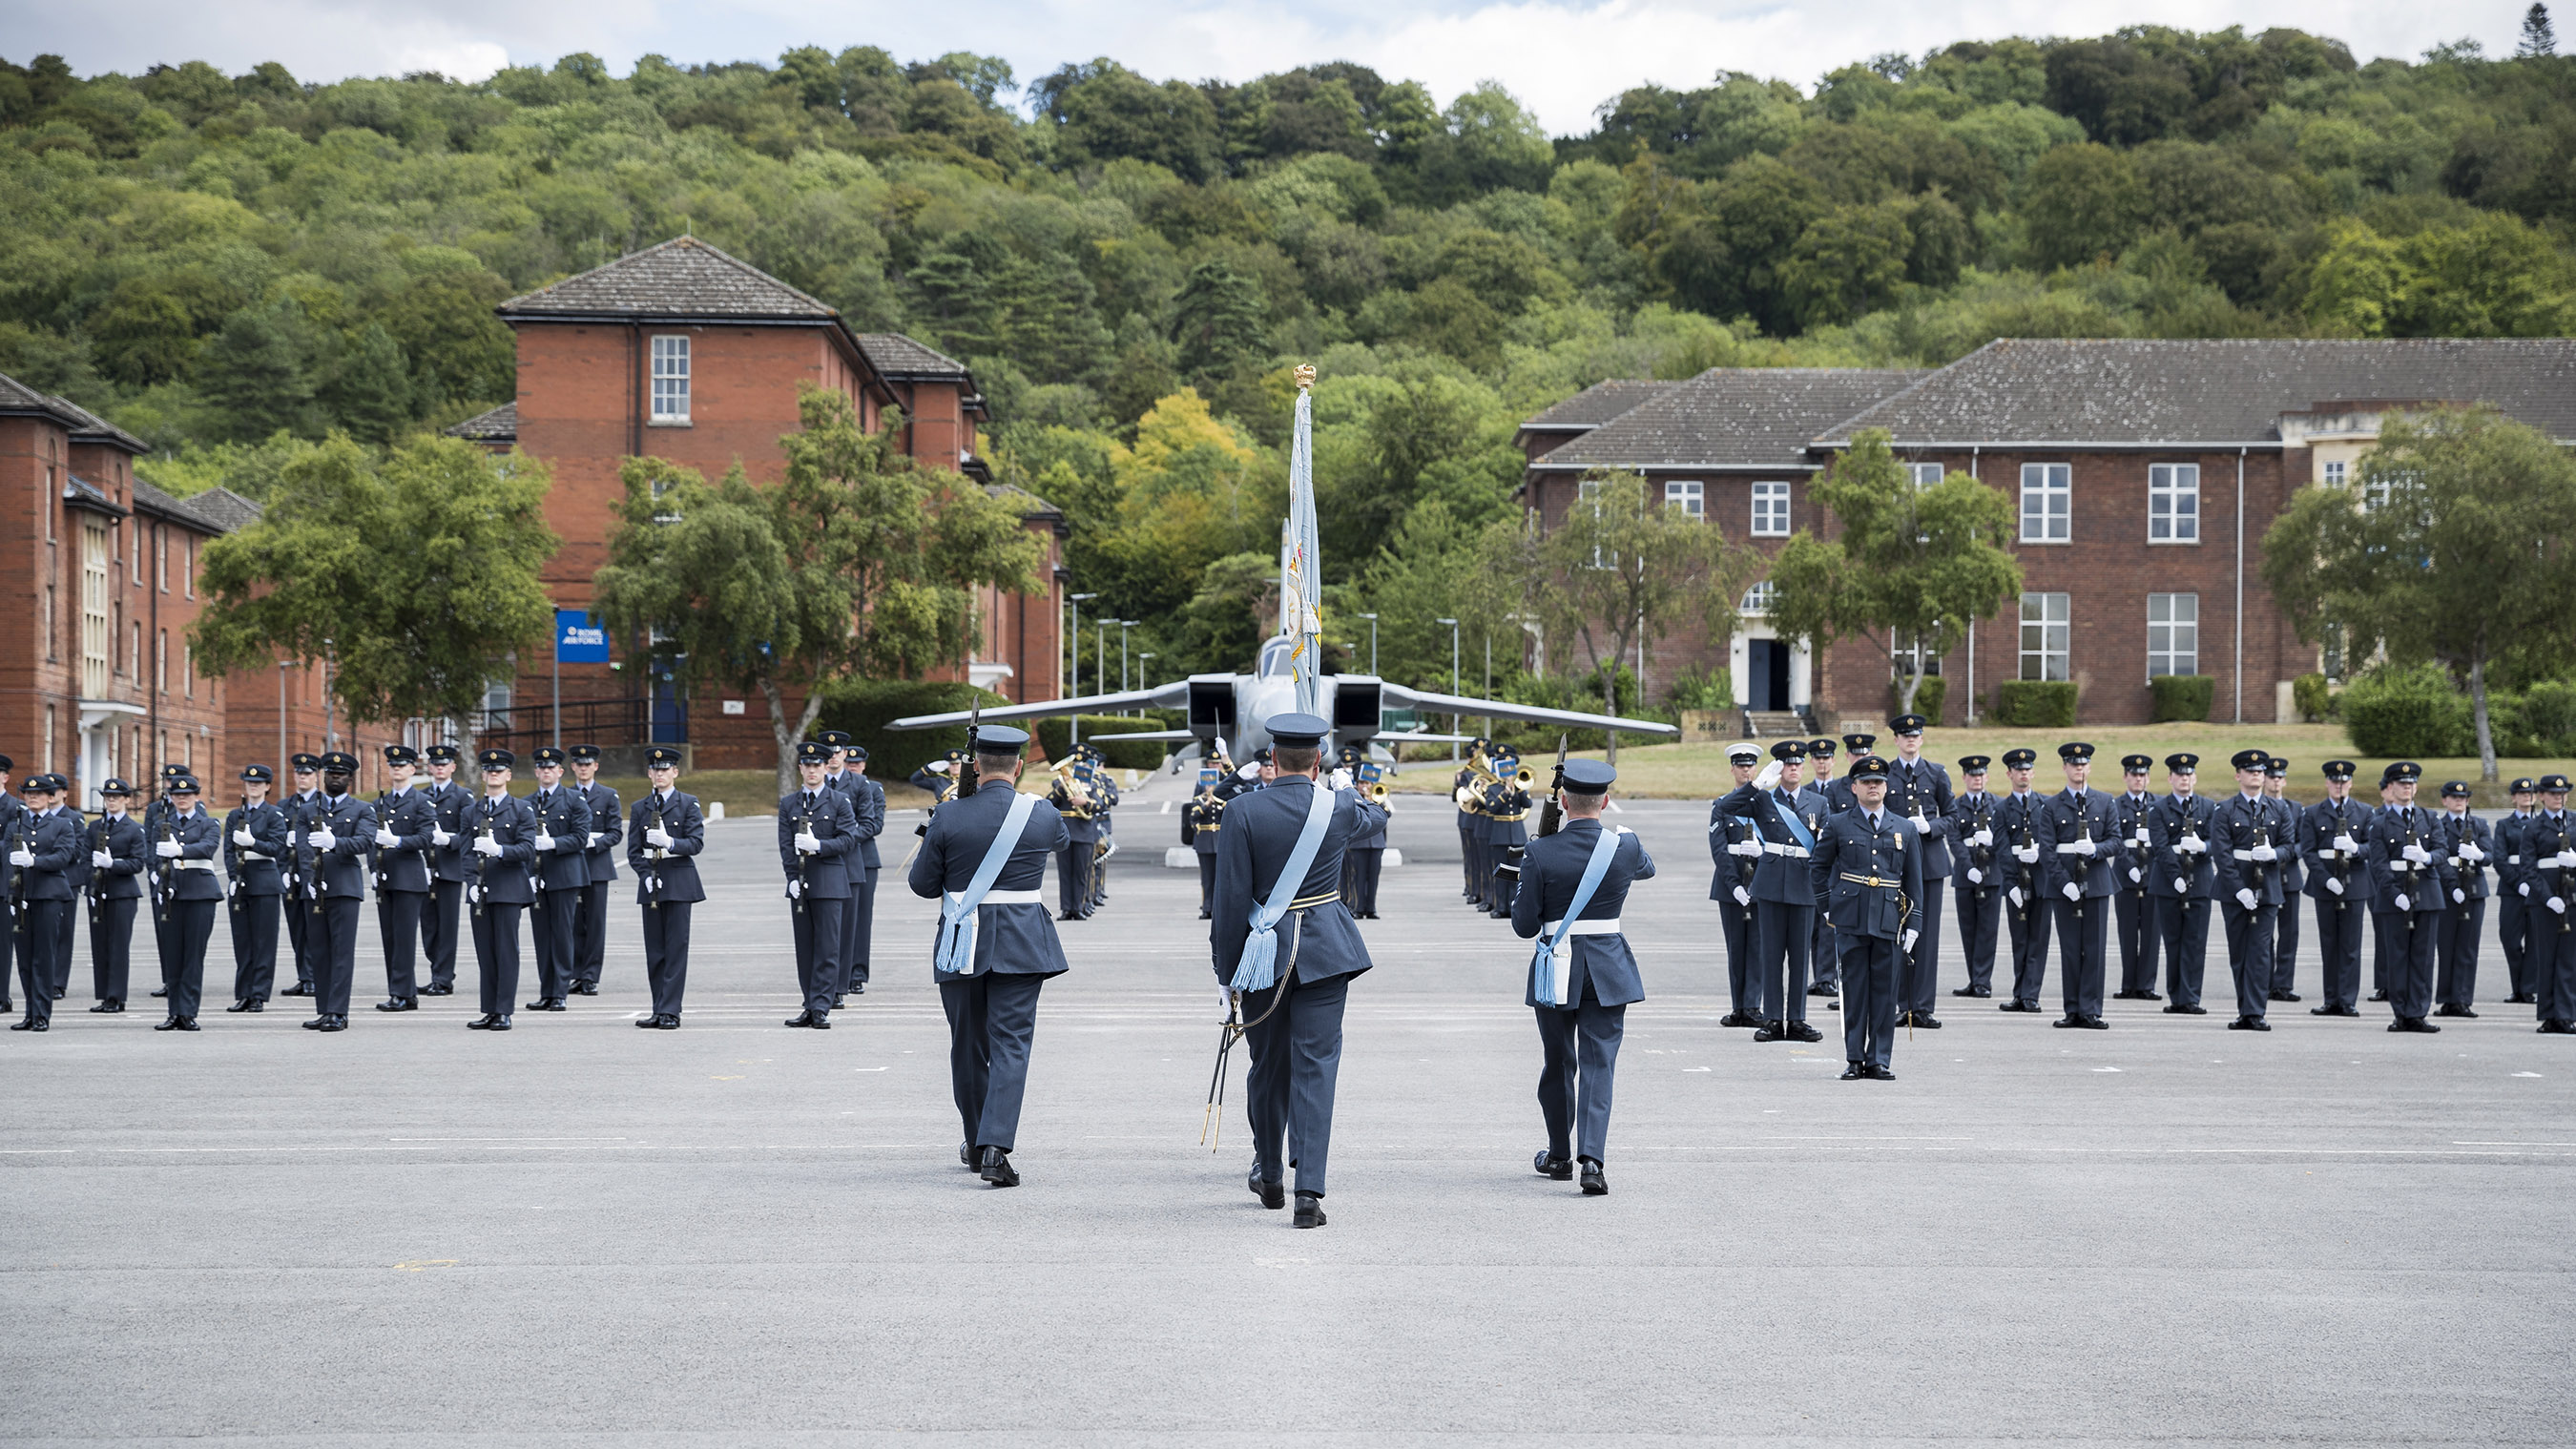 Personnel on parade with model Hawker Hunter on the parade square.